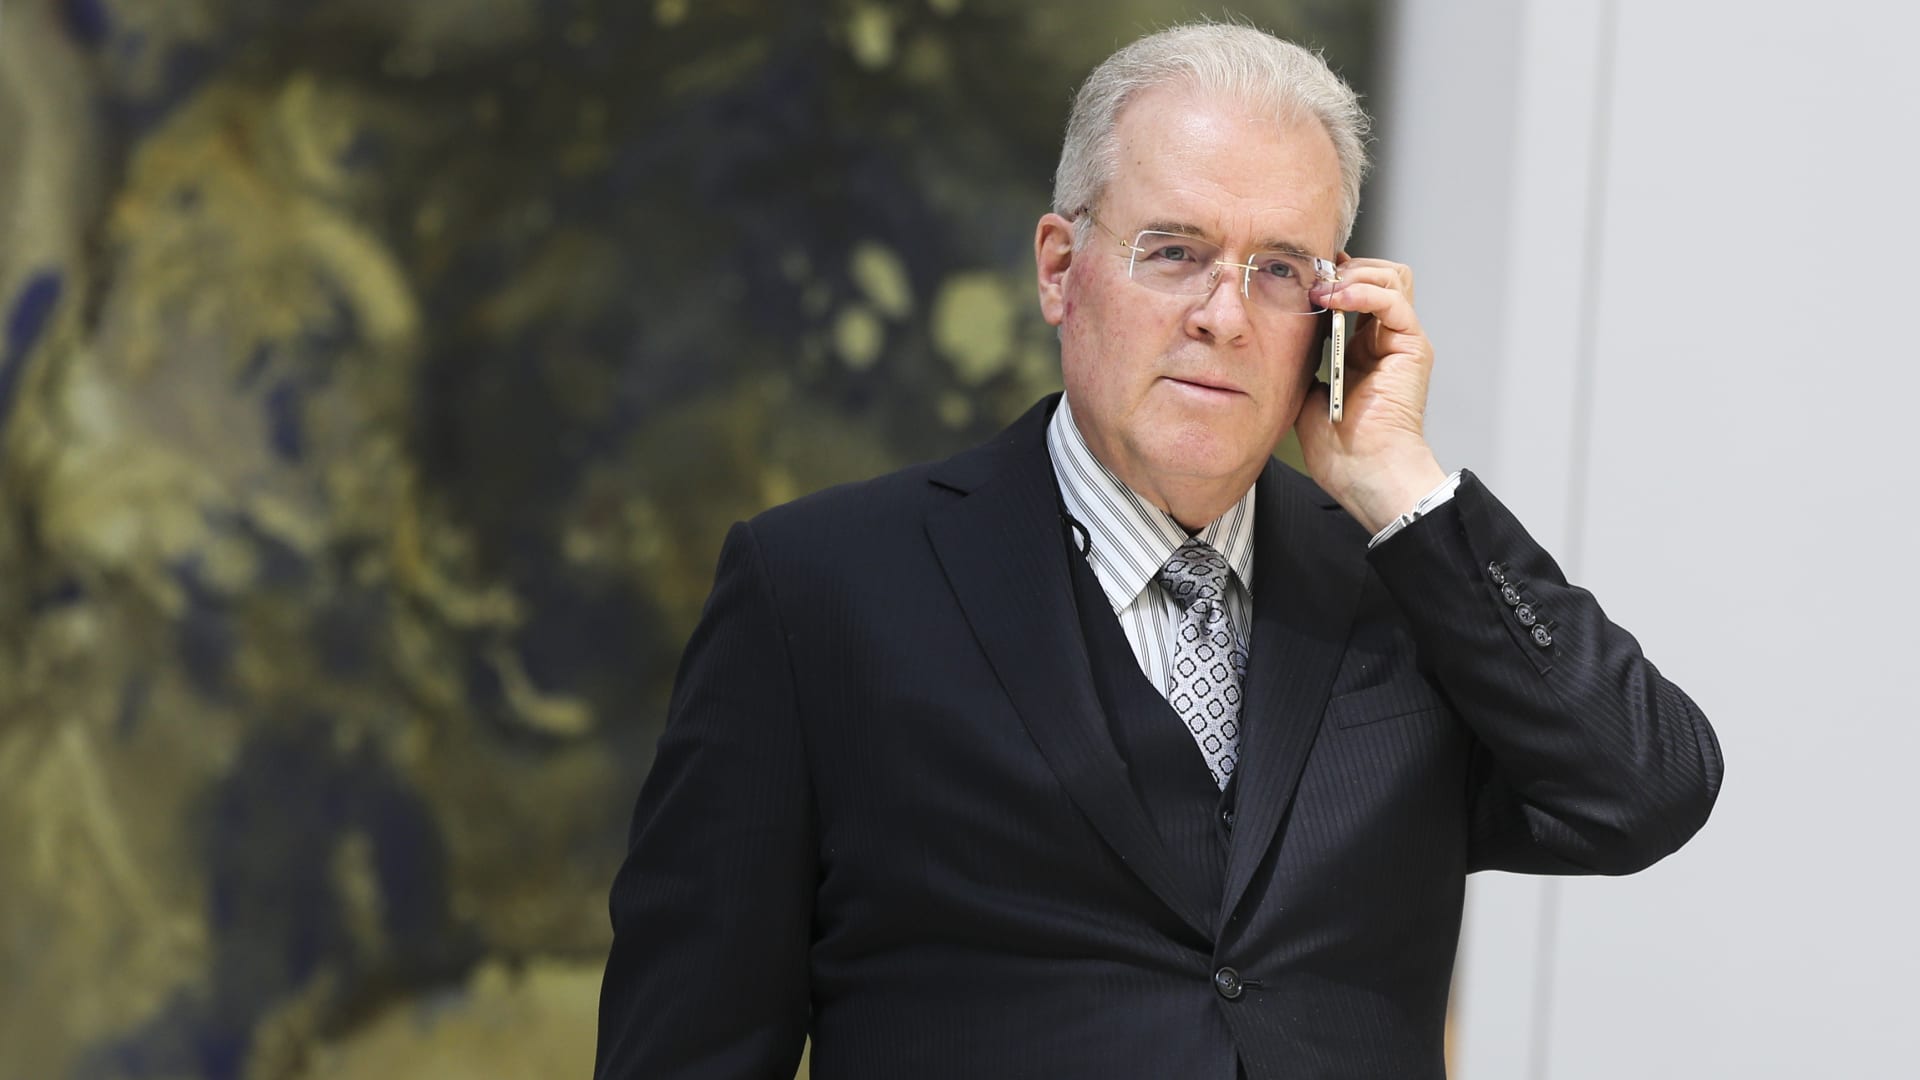 Billionaire Robert Mercer speaks on the phone during the 12th International Conference on Climate Change hosted by The Heartland Institute on March 23, 2017 in Washington, D.C.